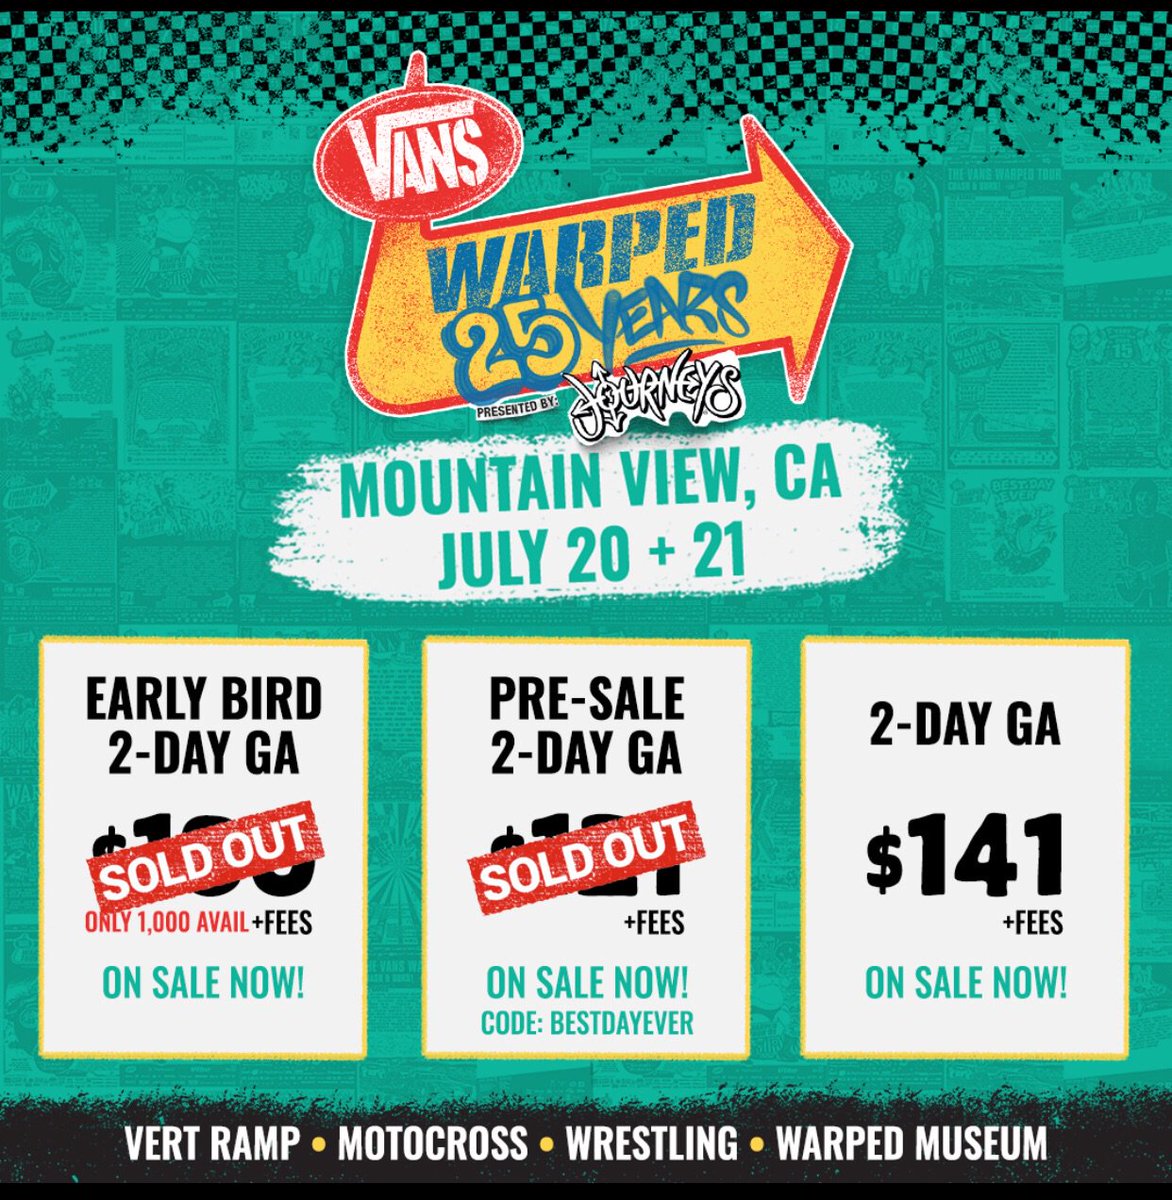 I’m happy to announce that The Violents & I are coming to Atlantic City, NJ on June 29/30 & Montainview, CA on July 20/21 for the 25th Anniversary of the @VansWarpedTour ! 
Tickets on sale now vanswarpedtour.com
see you there!xofrnk
#vanswarpedtour #warpedtour #foreverwarped